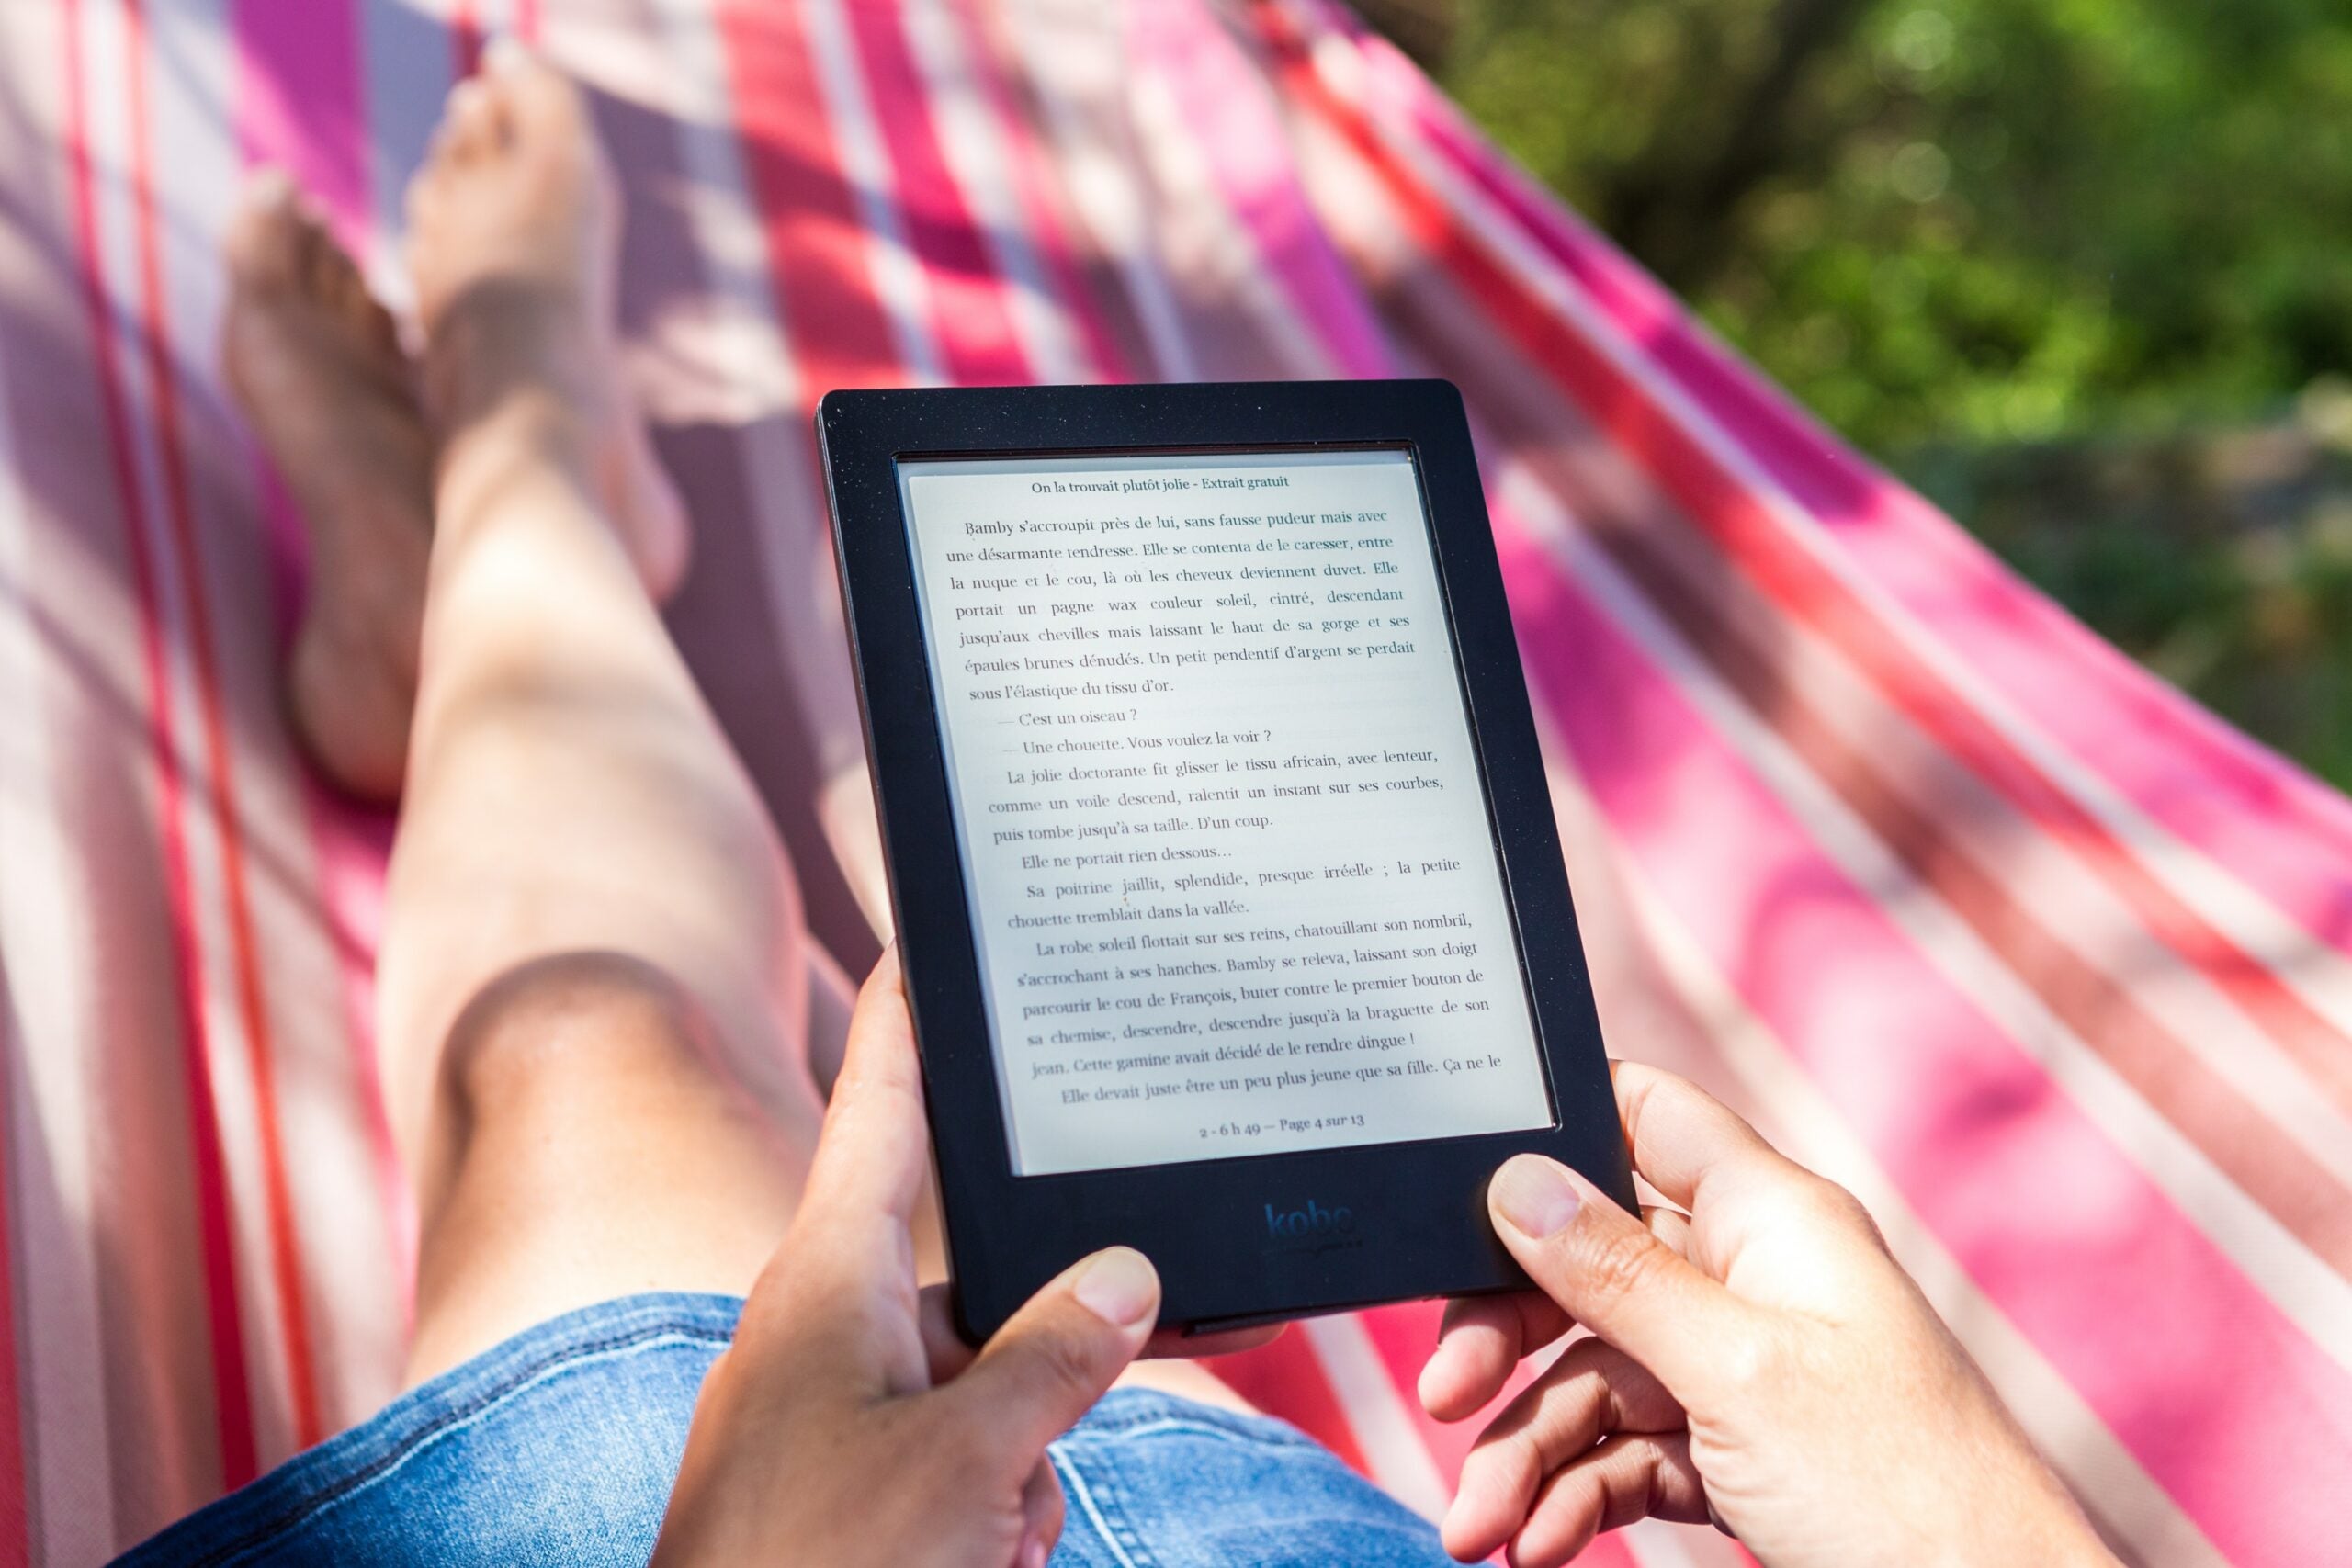 A person in a hammock outside, reading an e-book on a Kindle.